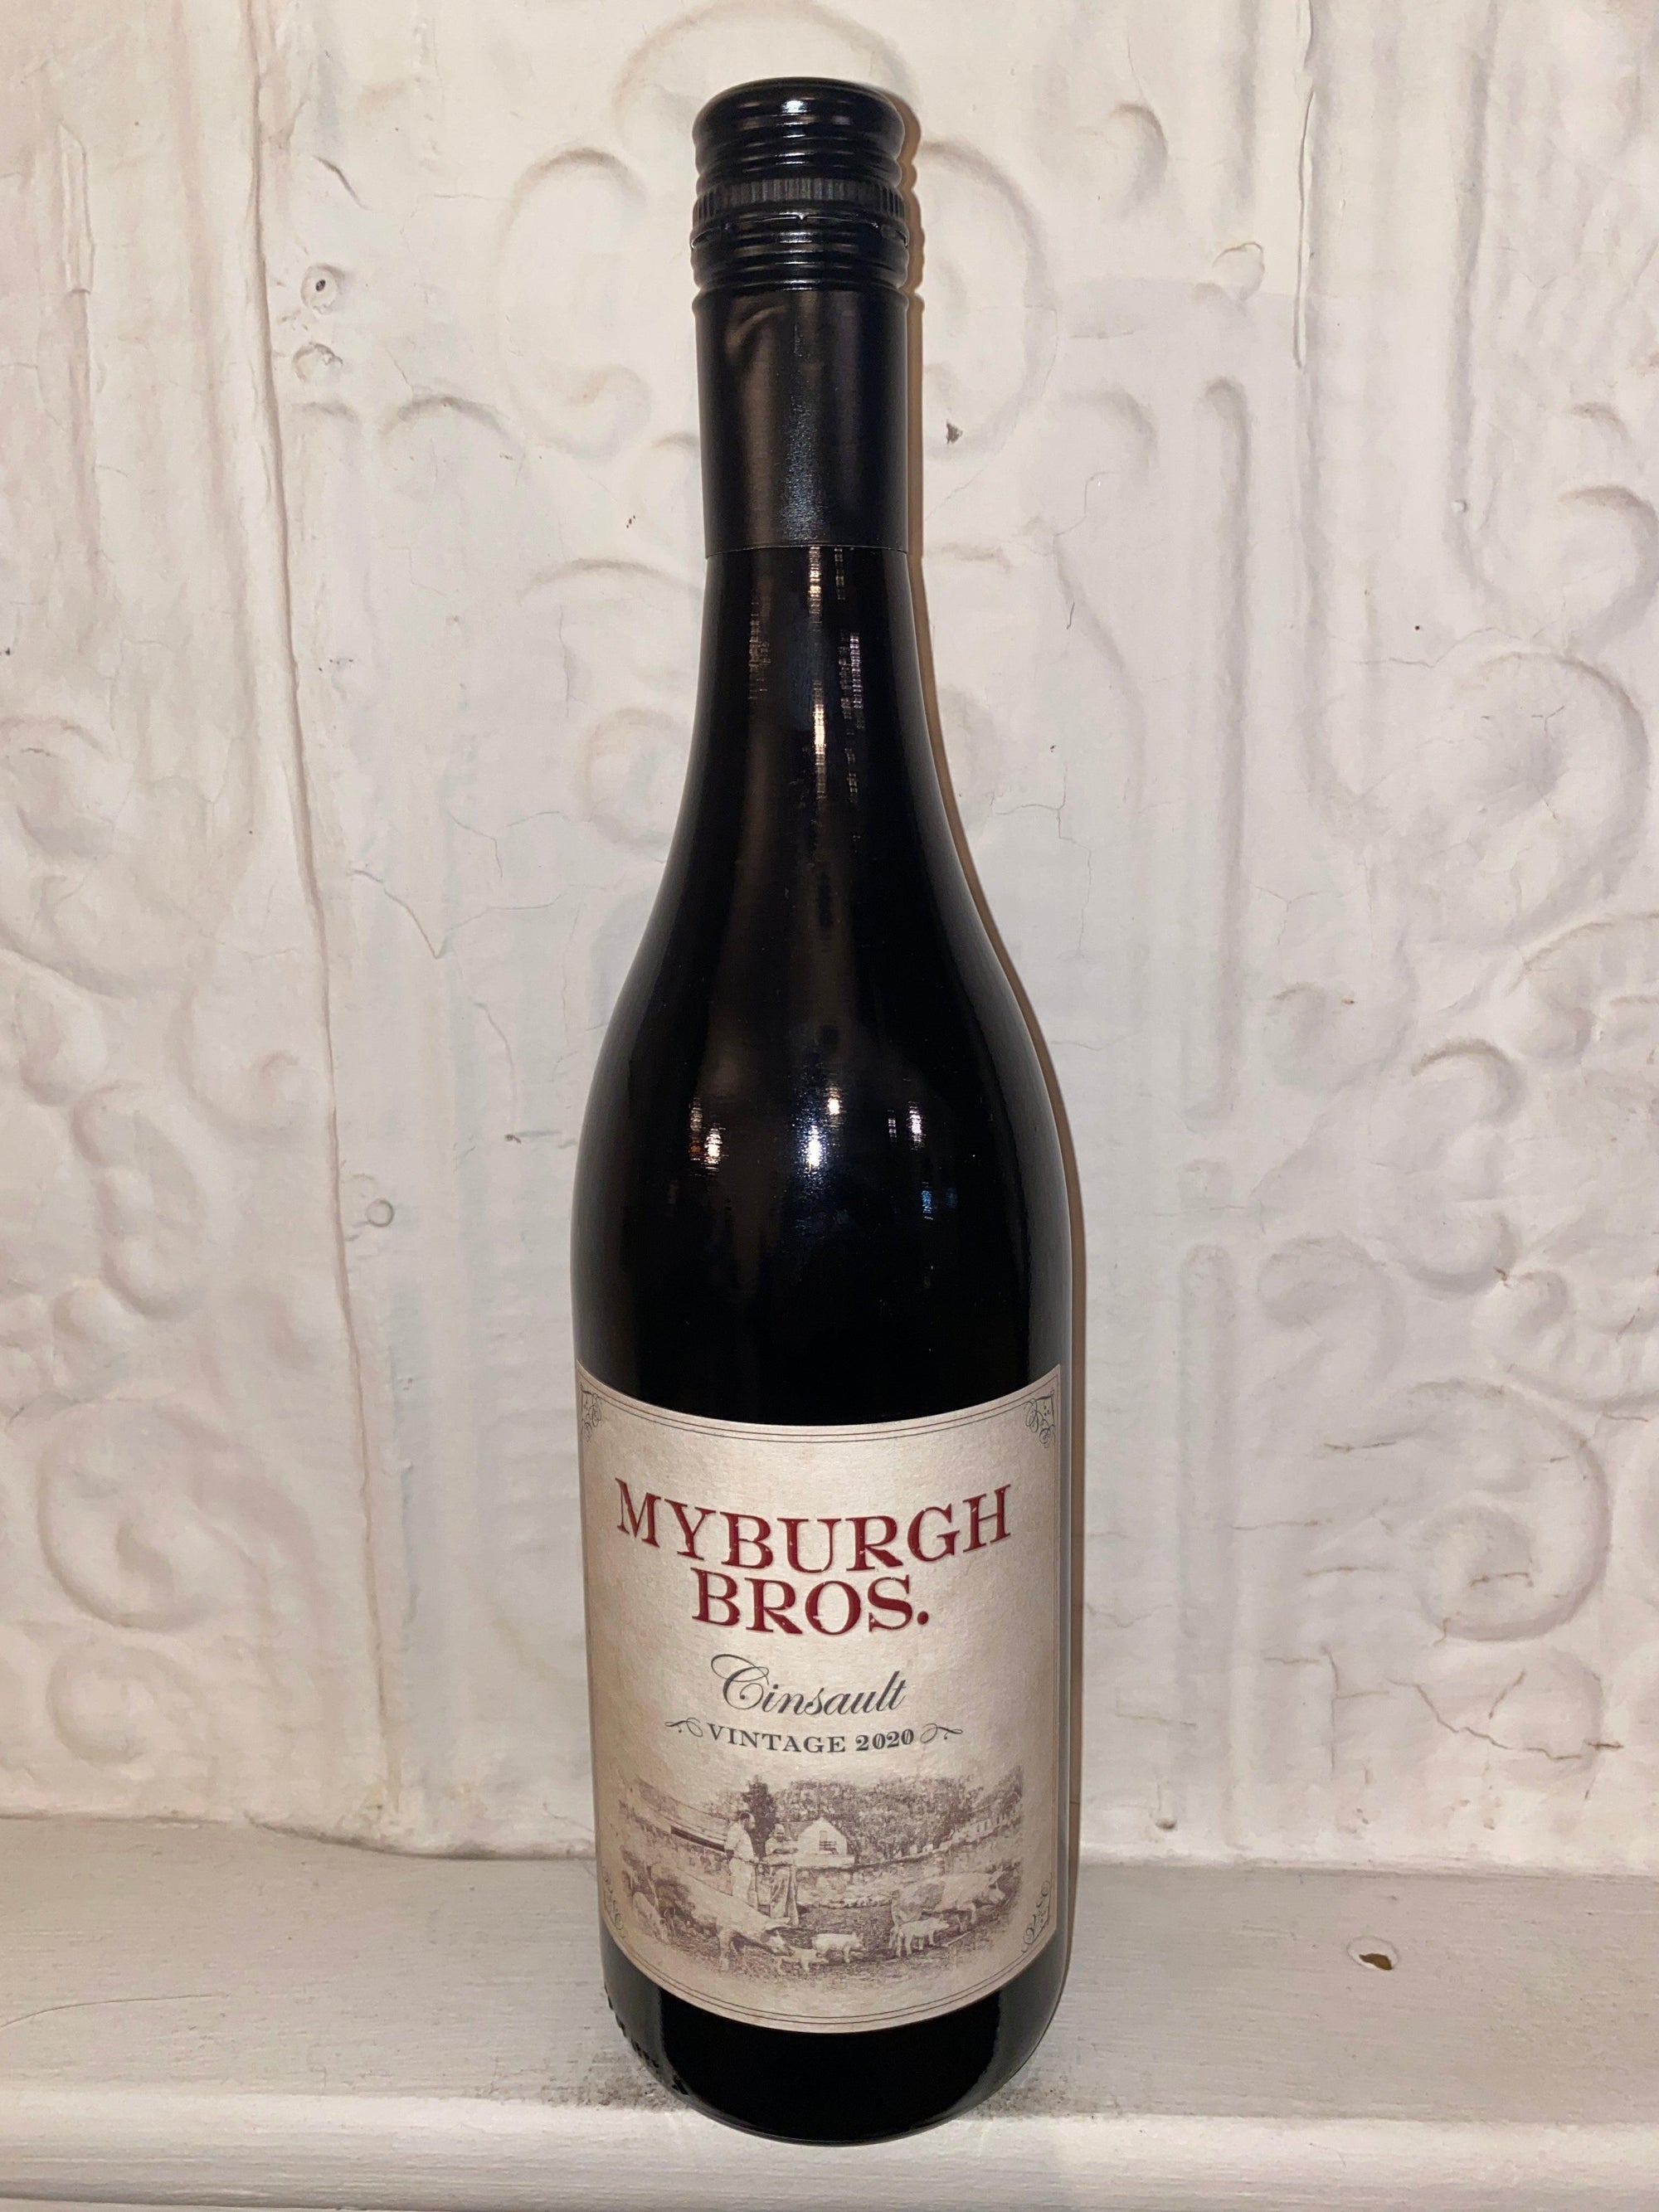 Cinsault, Myburgh Brothers 2020 (Paarl, South Africa)-Wine-Bibber & Bell